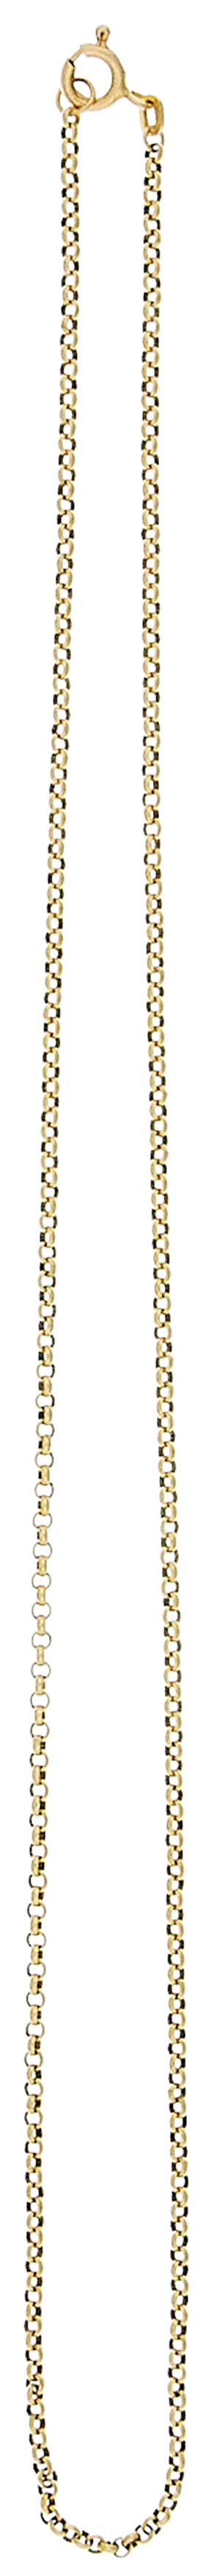 Necklaces without Gems Pea chain. 20th ... 